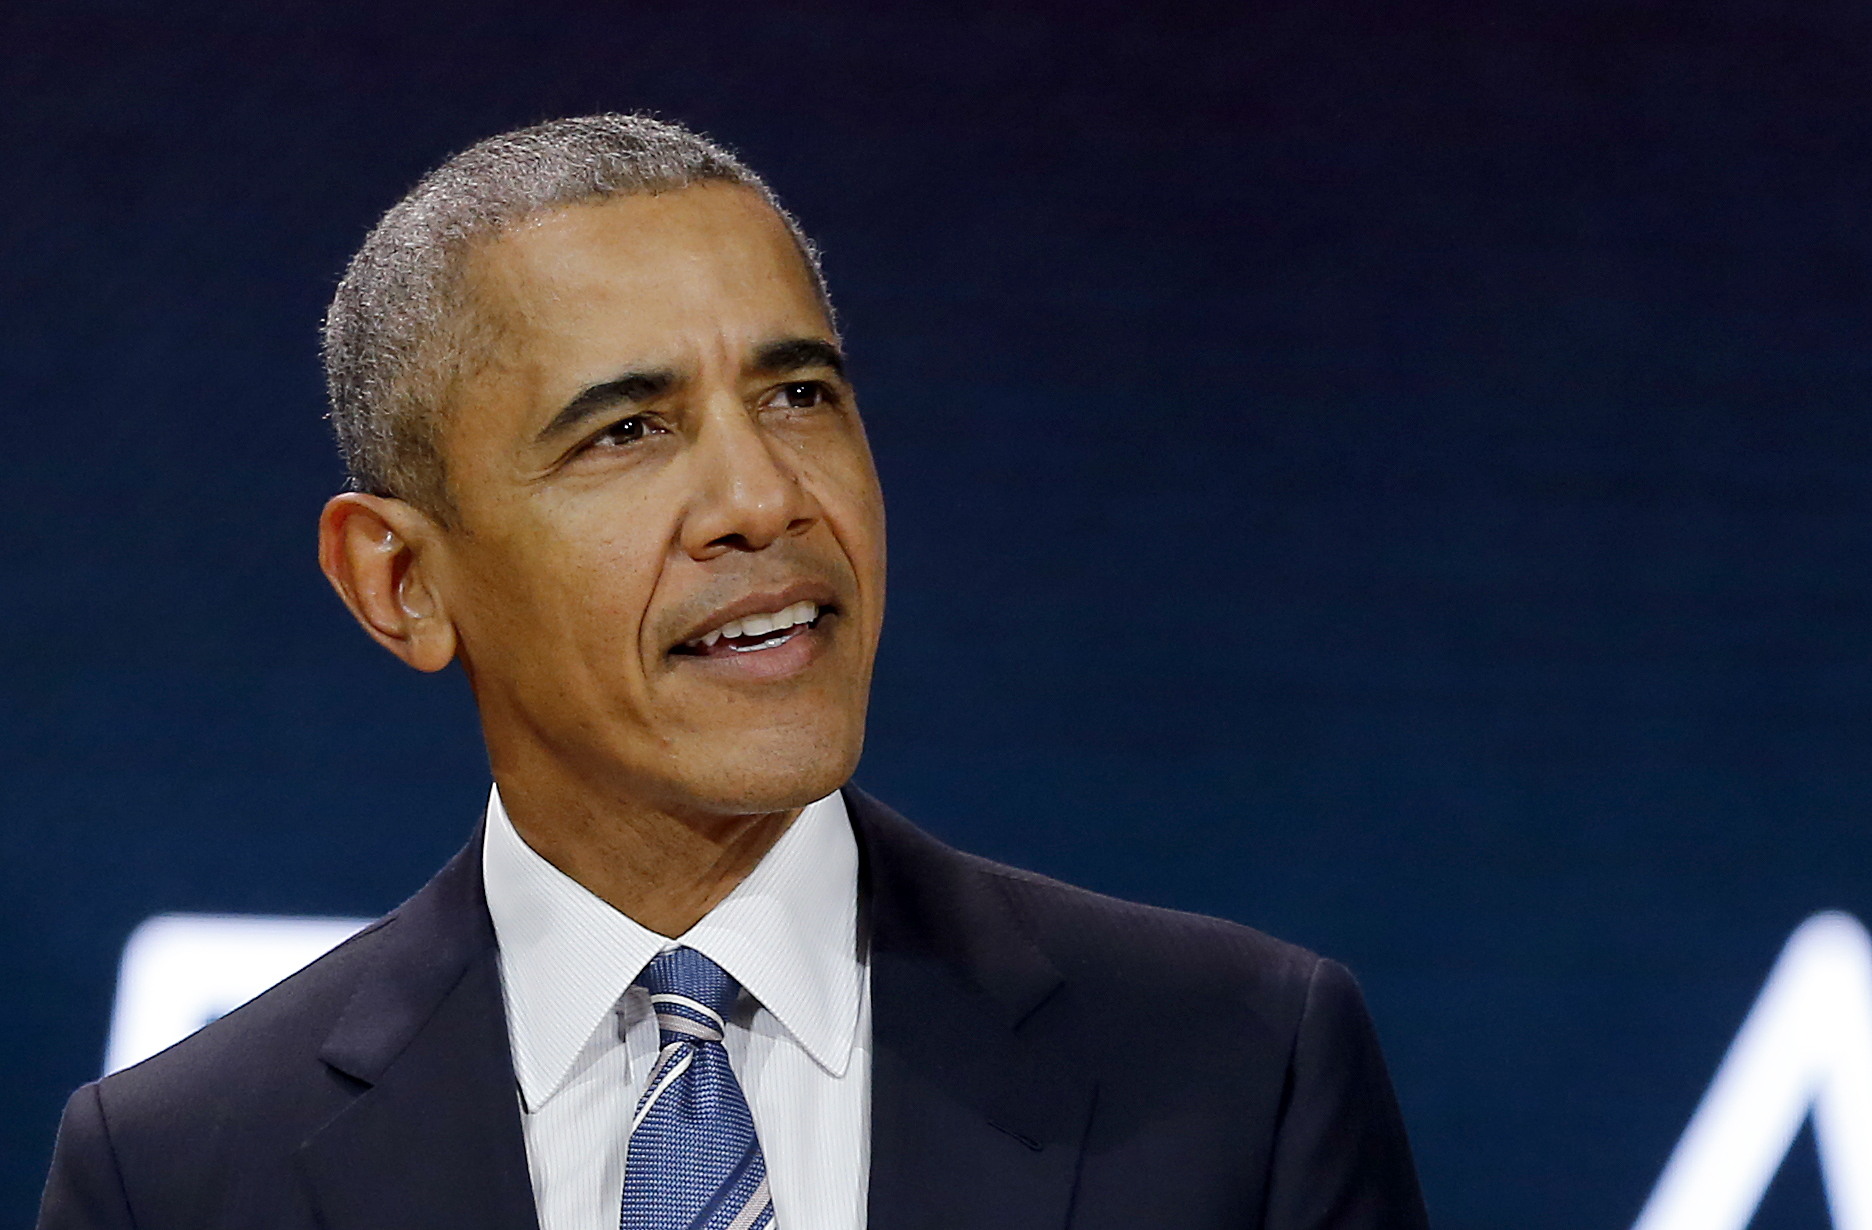 Barack Obama delivers a speech in Paris, France. (Chesnot&mdash;Getty Images)